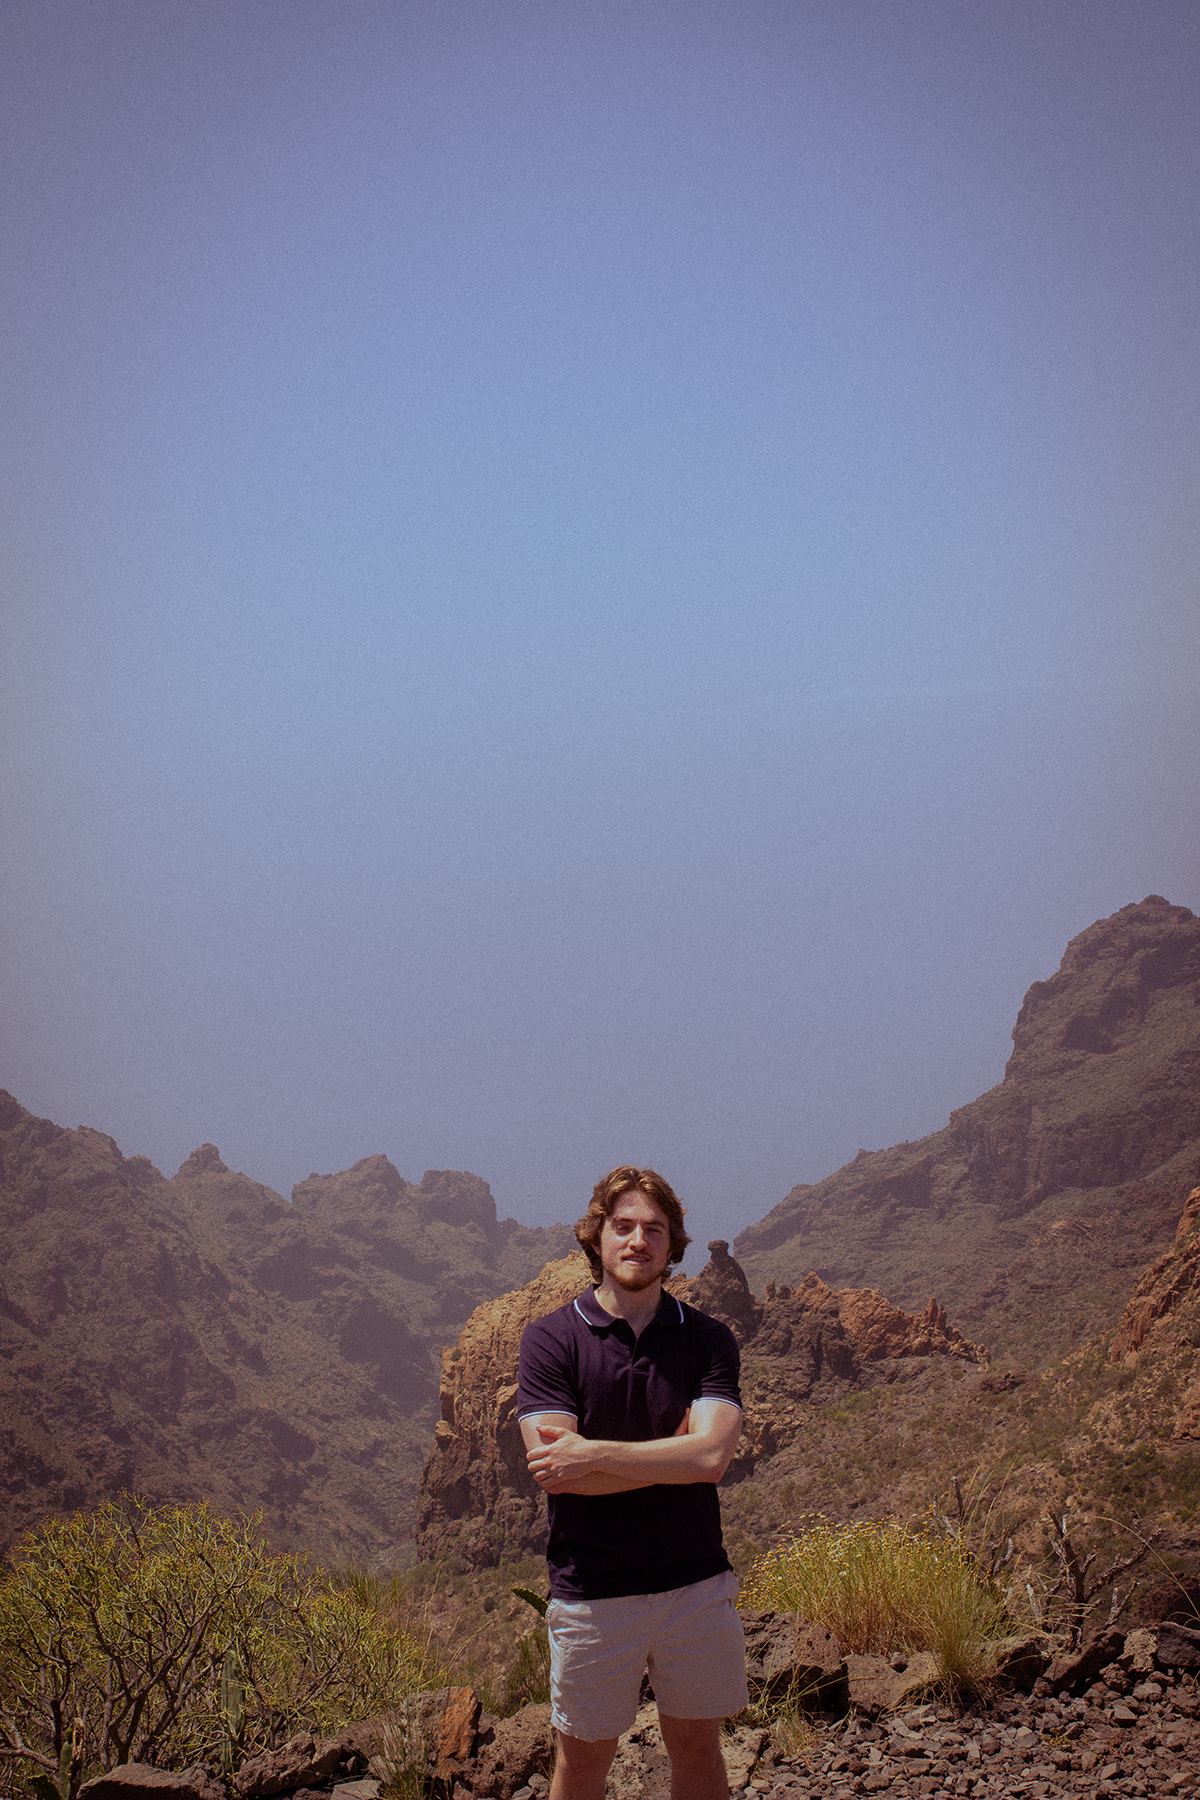 Looking out onto Tenerife from the mountaintops.